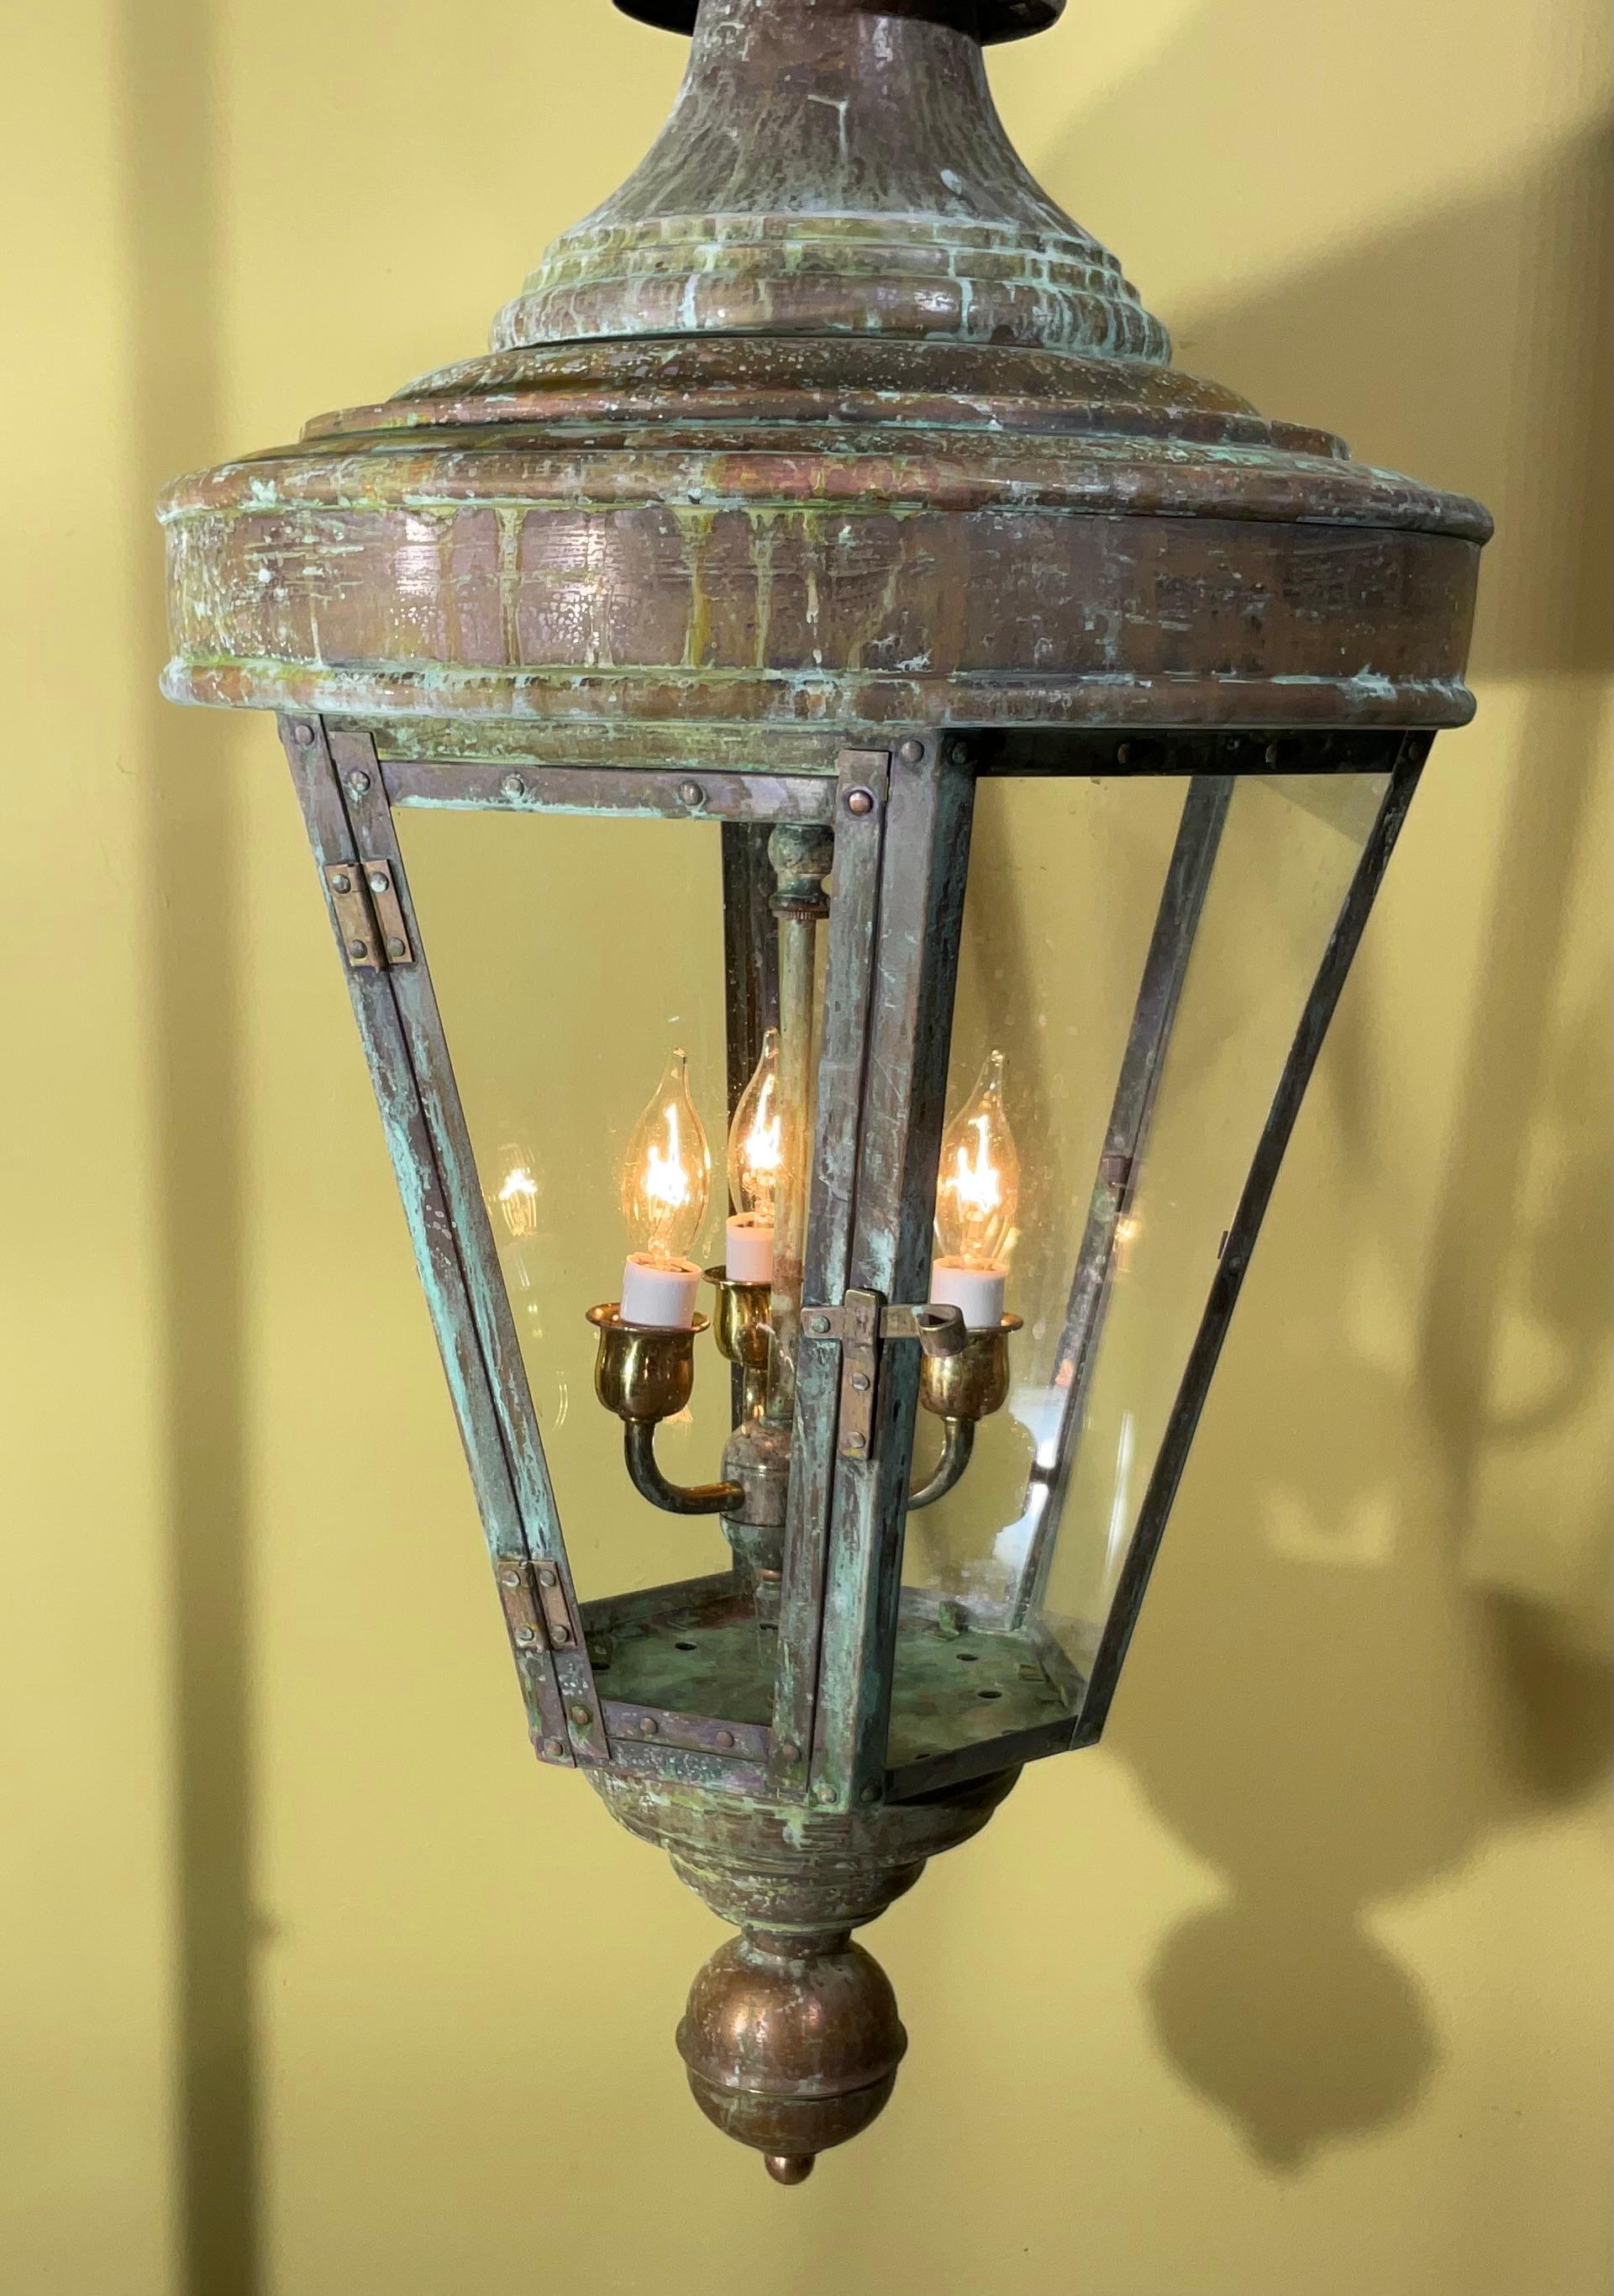 Beautiful handcrafted lantern made of solid copper with three 60/watt lights.
Electrified and ready to use , Beautiful oxidization patina.
This lantern was originally gas lantern , and converted to become electric lantern 
exceptional object of art